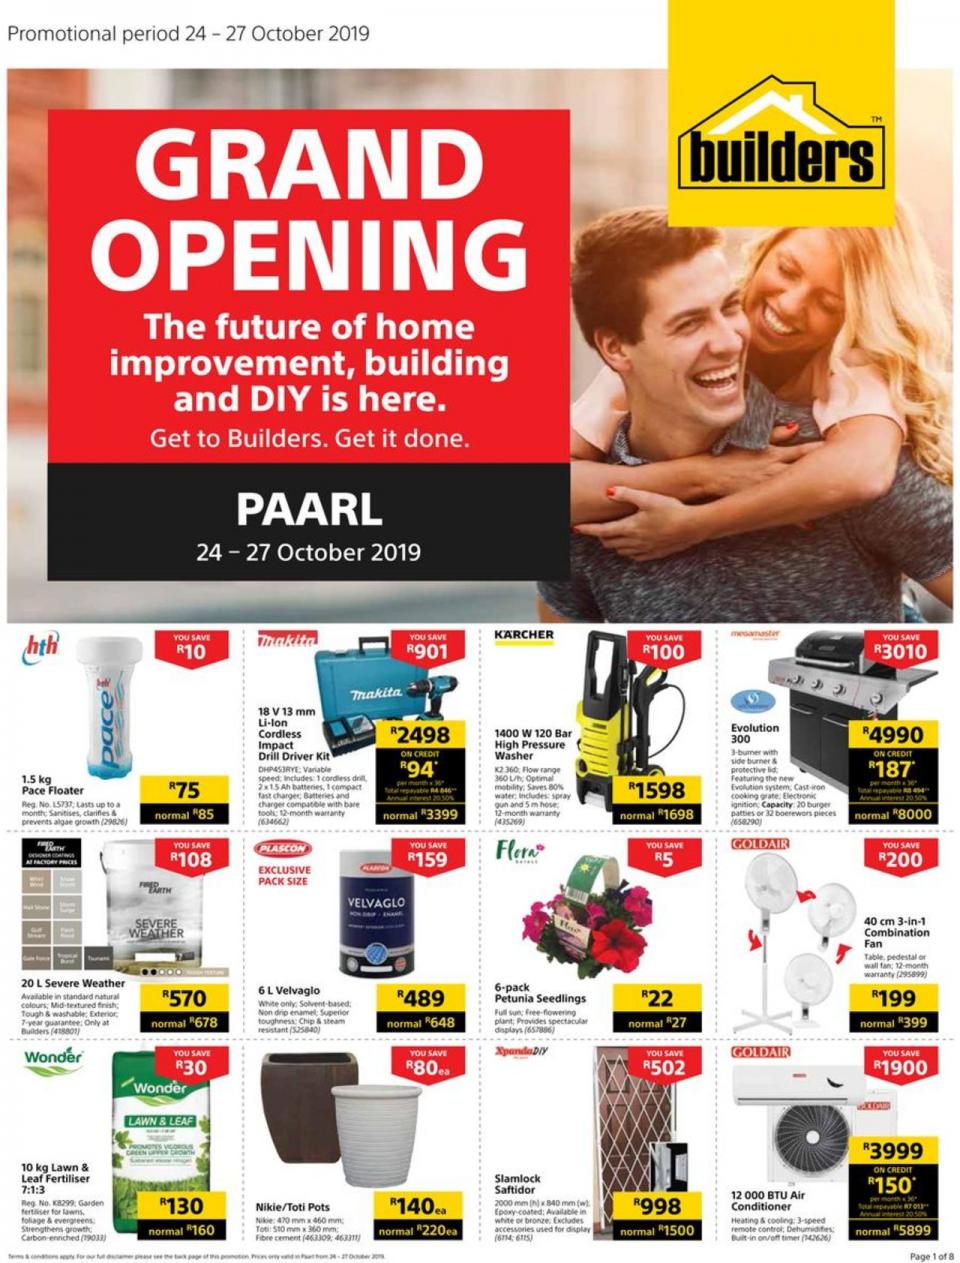 Builders Warehouse Express Paarl Grand Opening 24 October 2019